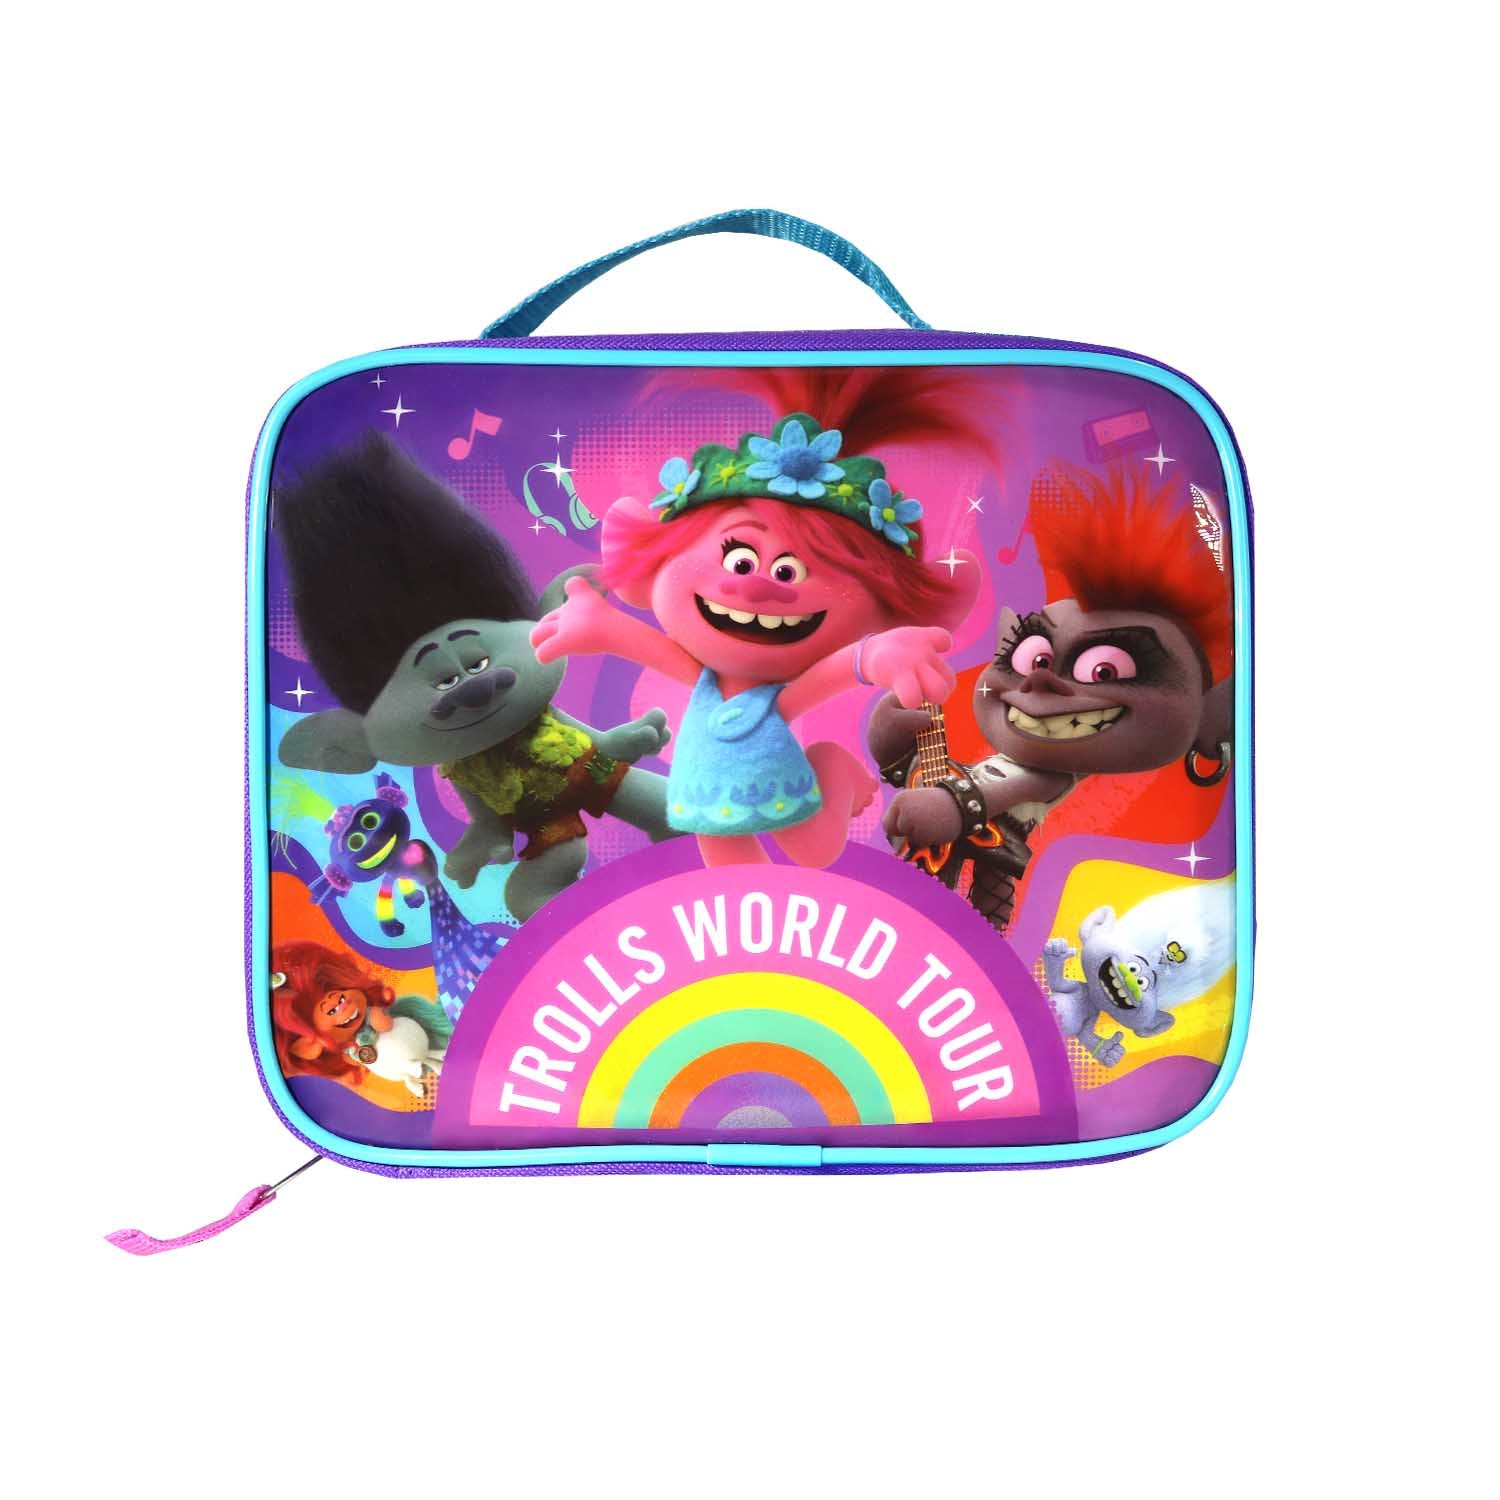 Trolls World Tour 16 School Backpack With Lunch Box - 2 Piece Set